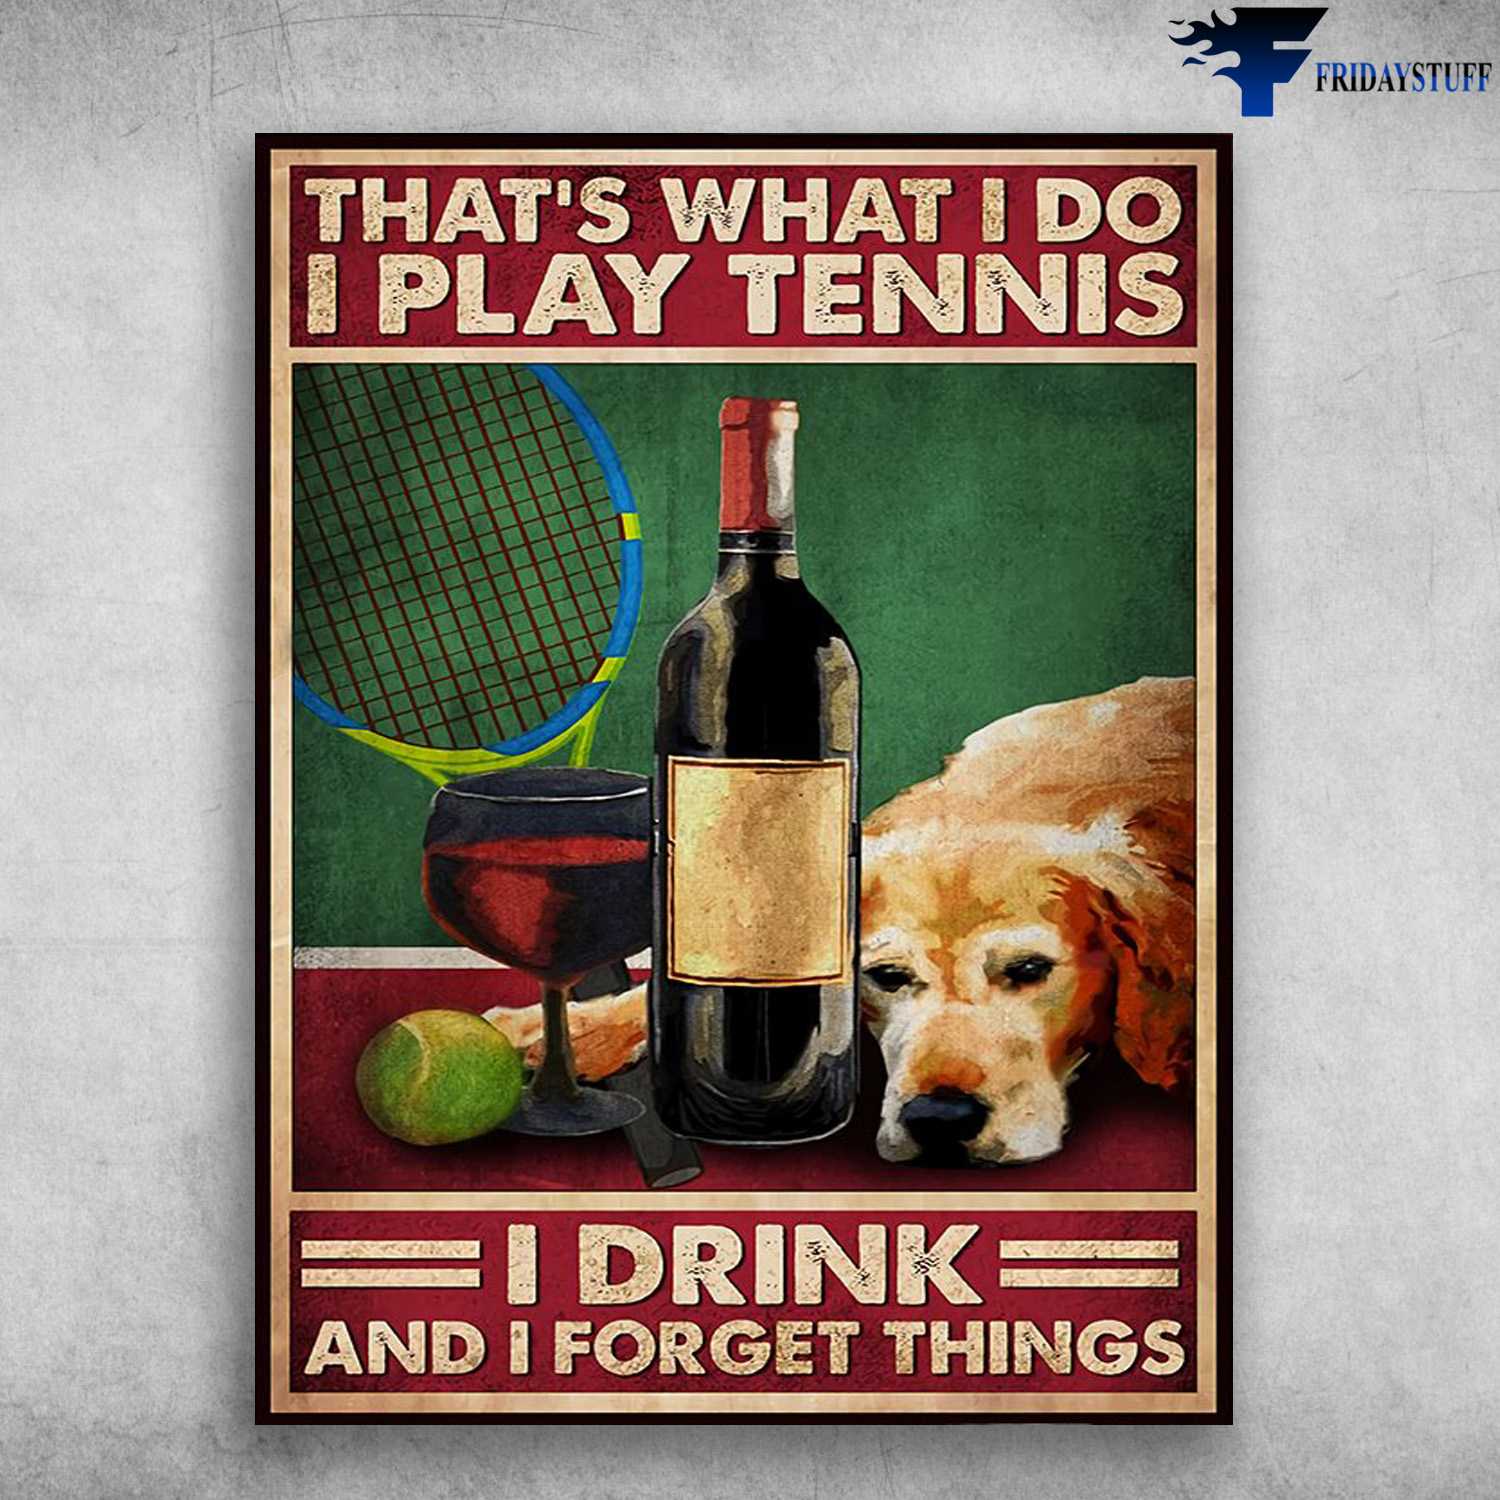 Dog And Wine, Tennis Poster - That's What I Do, I Play Tennis, I Drink, And I Know Things